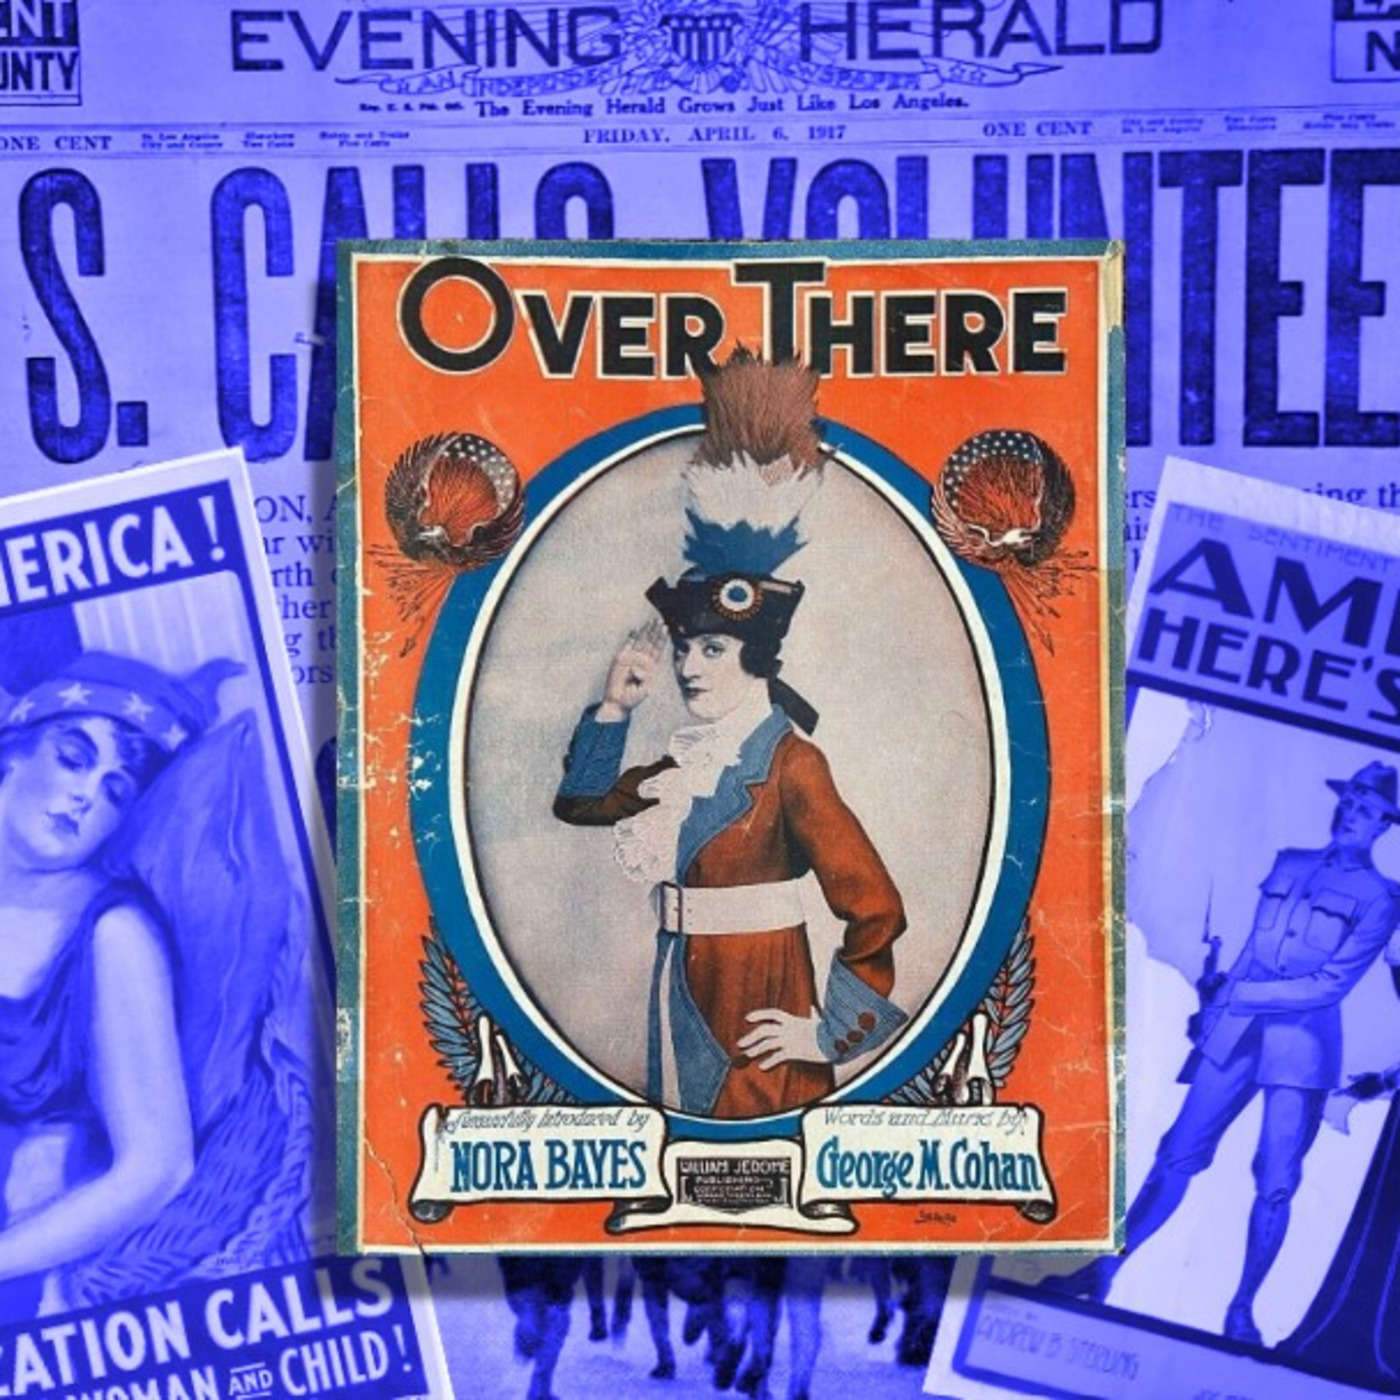 Episode 27: ”Over There” (1917)